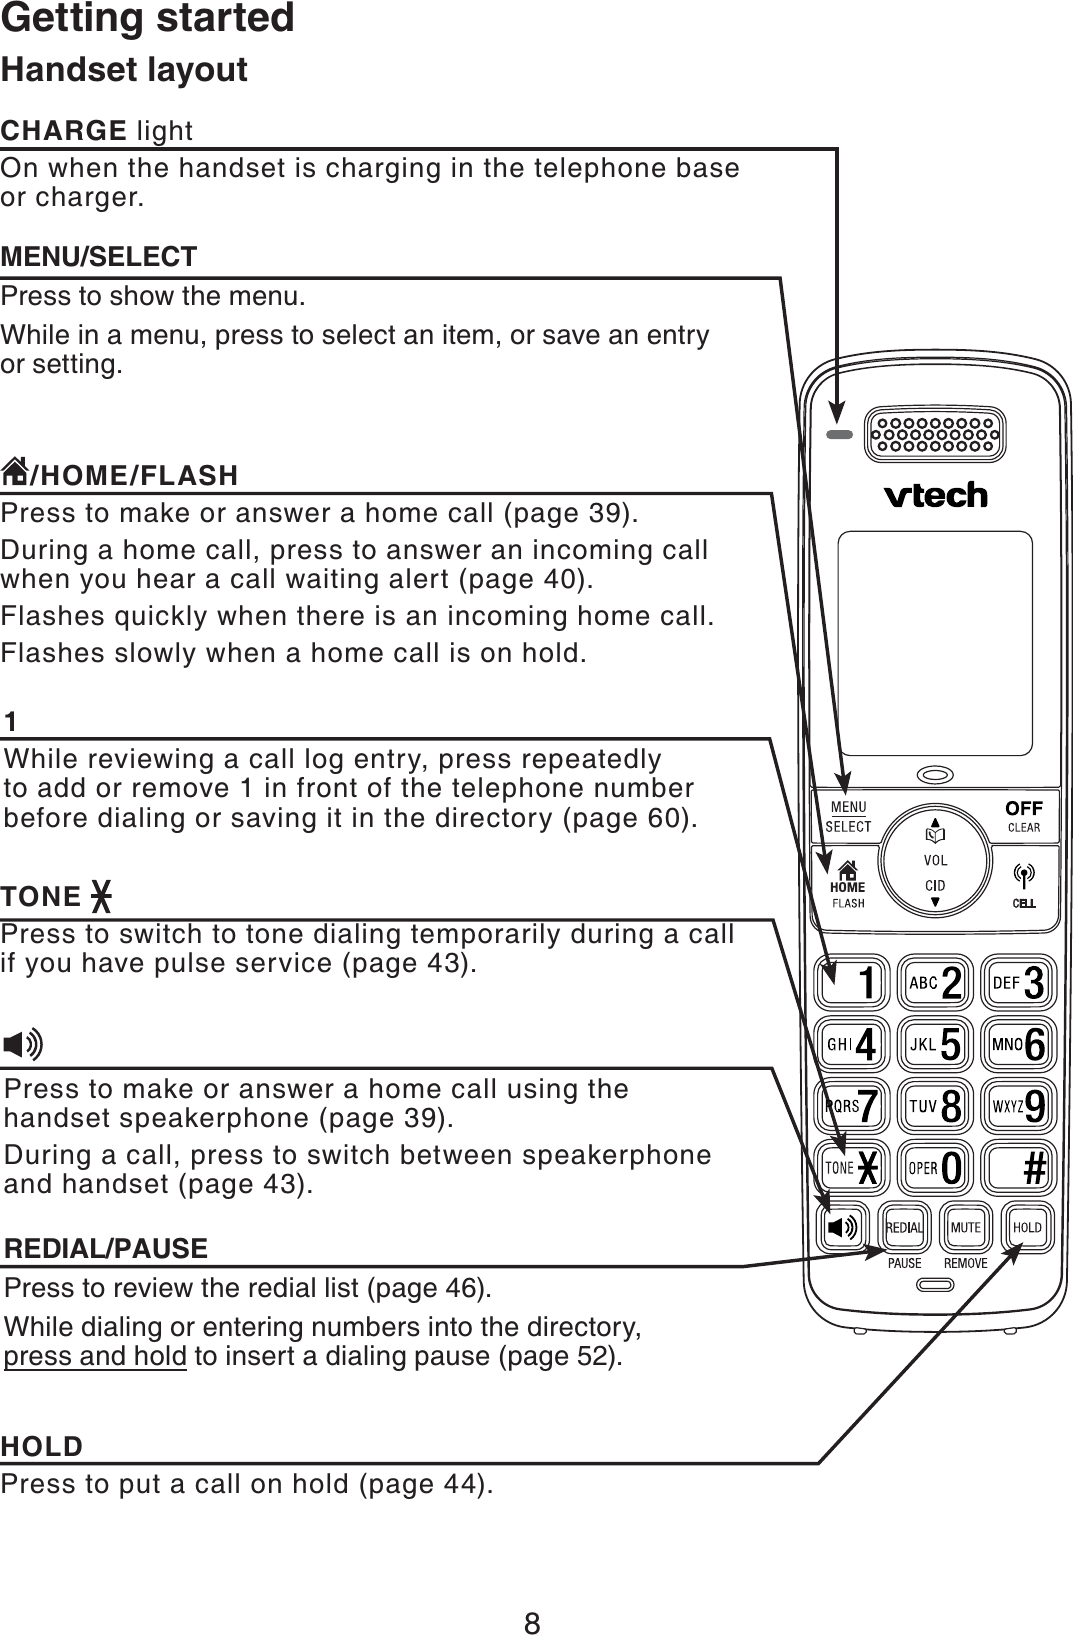 8Getting startedHandset layout1While reviewing a call log entry, press repeatedly to add or remove 1 in front of the telephone number before dialing or saving it in the directory (page 60)./HOME/FLASHPress to make or answer a home call (page 39).During a home call, press to answer an incoming call when you hear a call waiting alert (page 40).Flashes quickly when there is an incoming home call.Flashes slowly when a home call is on hold.Press to make or answer a home call using the handset speakerphone (page 39).During a call, press to switch between speakerphone and handset (page 43).HOLDPress to put a call on hold (page 44).TONEPress to switch to tone dialing temporarily during a call if you have pulse service (page 43).CHARGE lightOn when the handset is charging in the telephone base or charger.MENU/SELECTPress to show the menu.While in a menu, press to select an item, or save an entry or setting.REDIAL/PAUSEPress to review the redial list (page 46). While dialing or entering numbers into the directory, press and hold to insert a dialing pause (page 52).